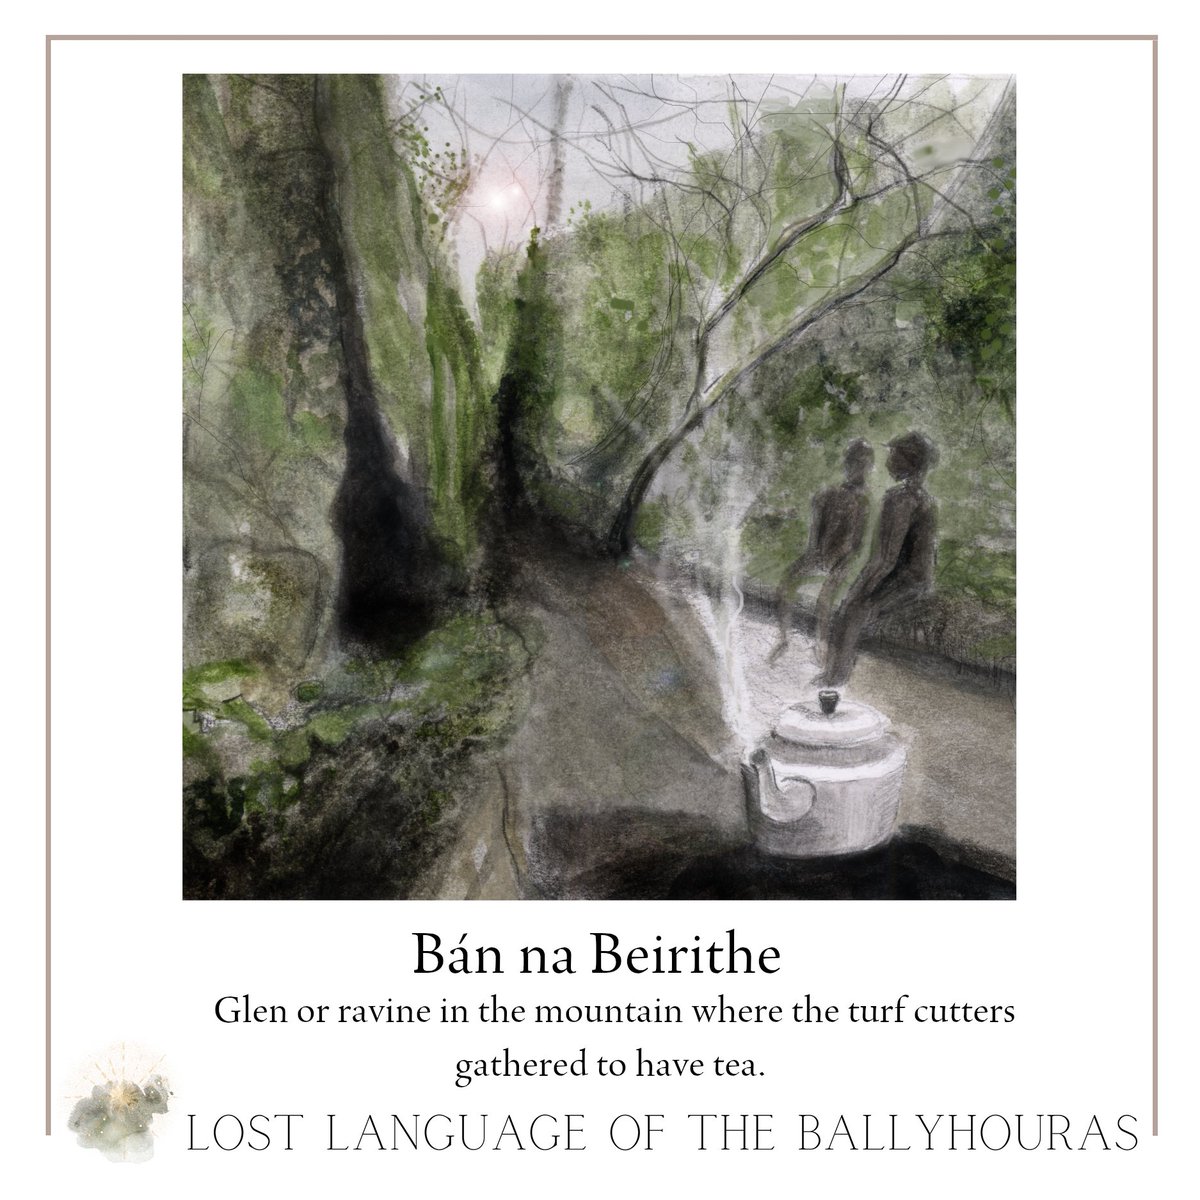 BÁN NA BEIRITHE A glen or ravine surrounded by ‘cumars’ in the mountain where turf cutters gathered to have tea. There was shelter from the wind and young lads would be sent there to boil the kettle. Illustration: Enagh Farrell Words from The Lost Language of the Ballyhouras